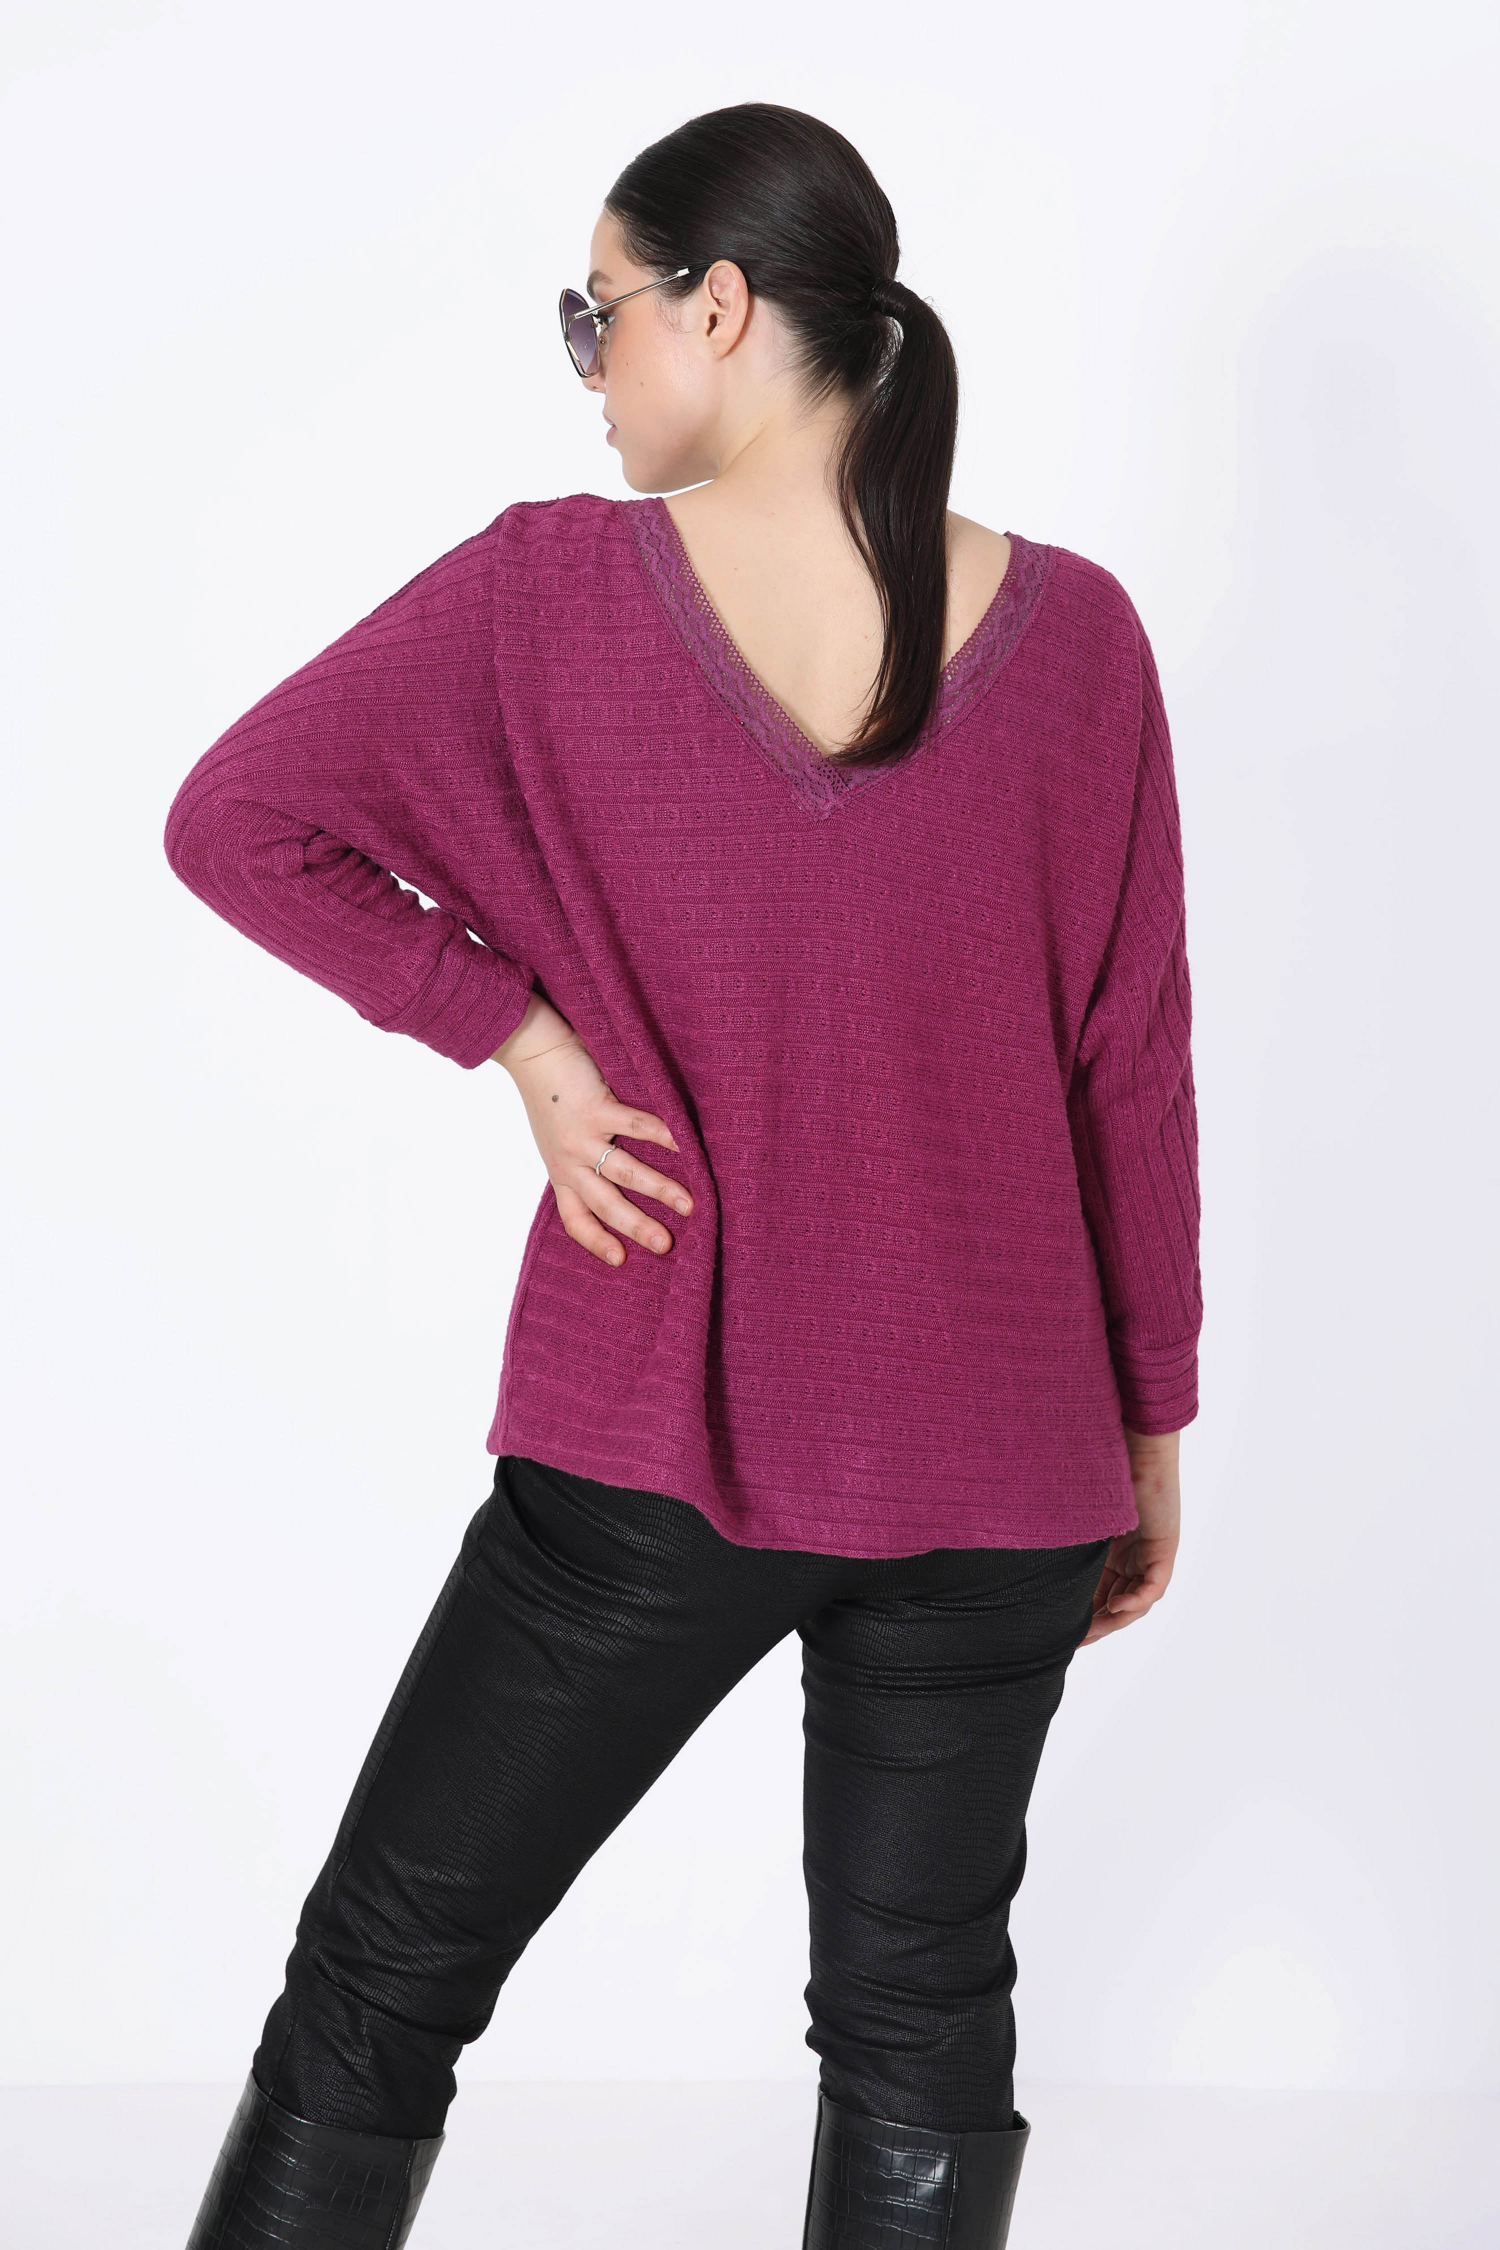 Cable-effect knit sweater with braid